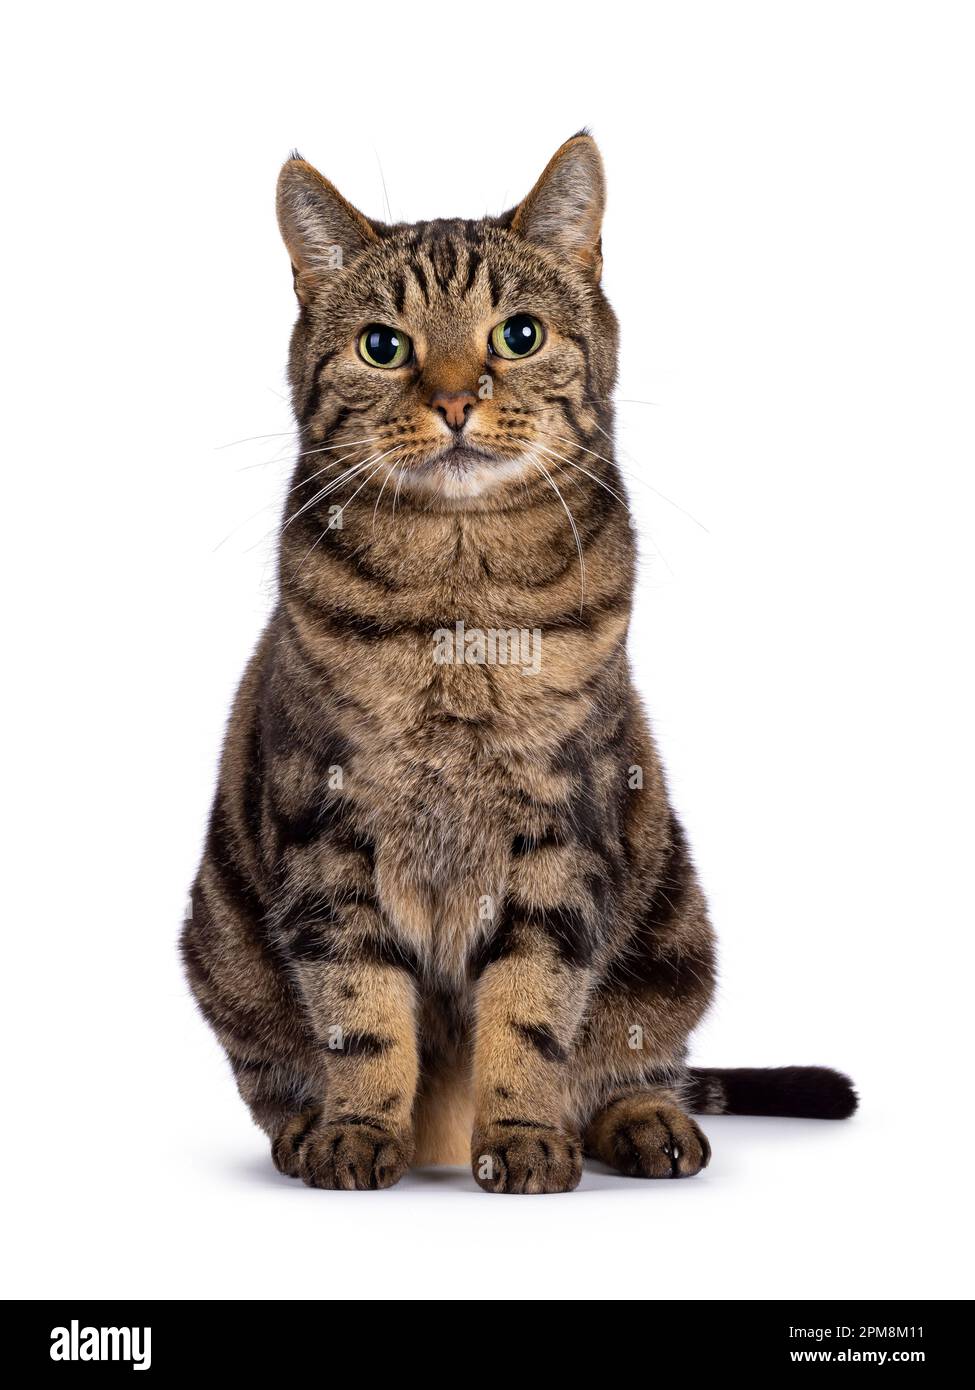 Excellent typed purebred senior European Shorthair cat, sitting up facing front. Looking at camera. Isolated on a white background. Stock Photo